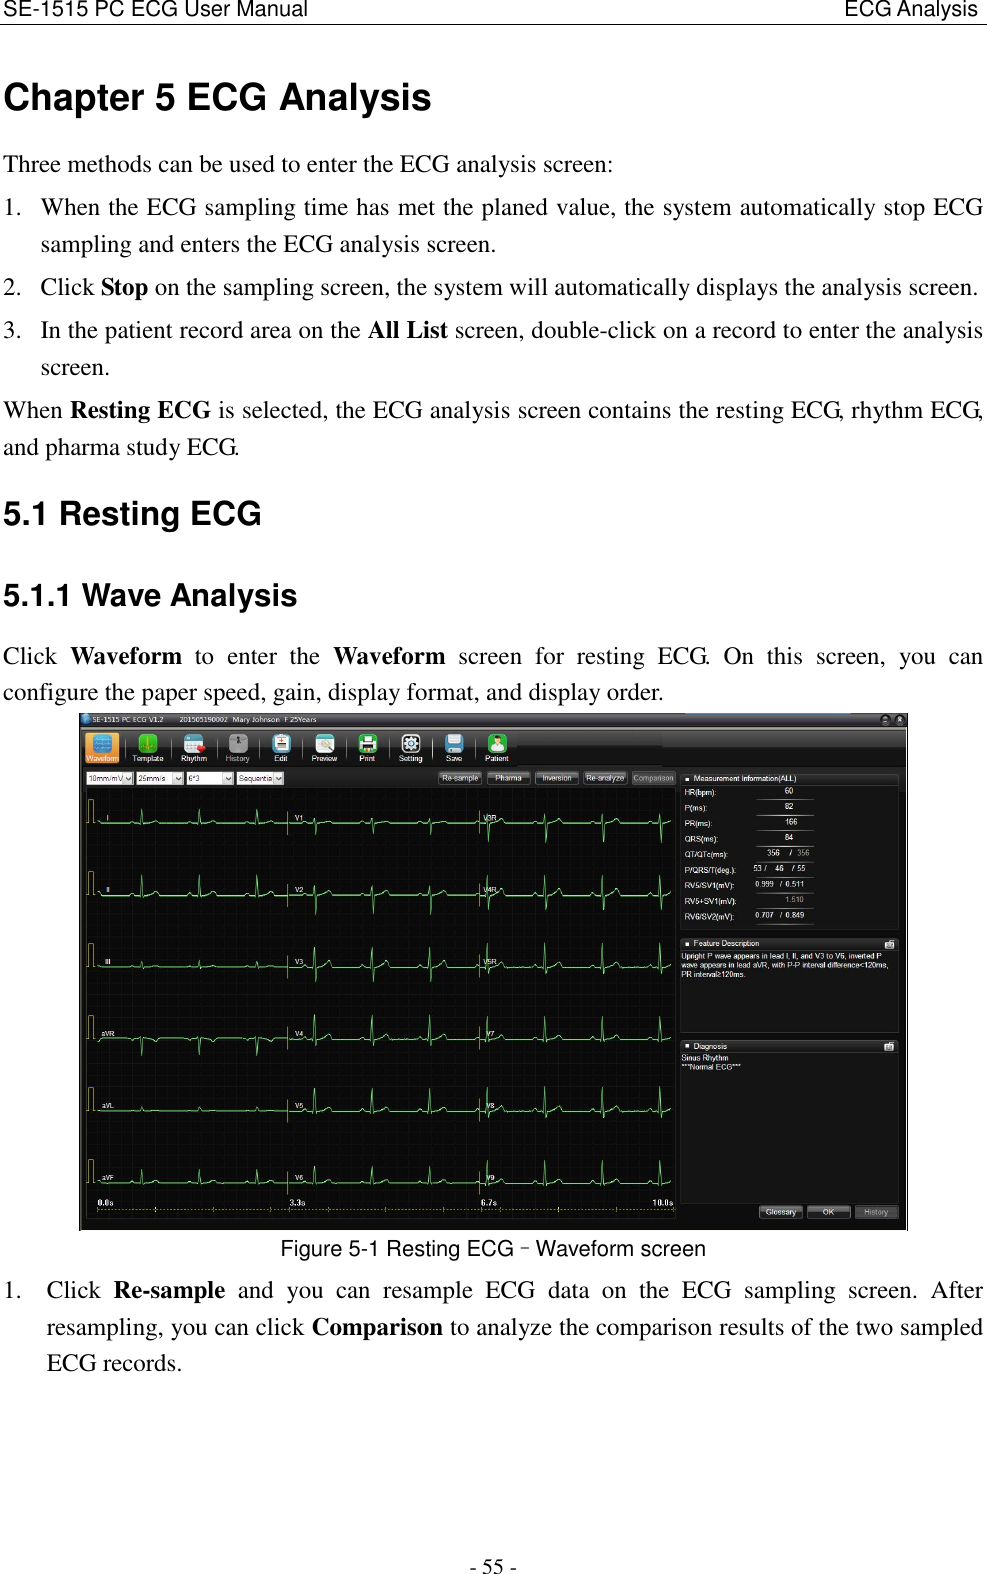 SE-1515 PC ECG User Manual                                                                                                  ECG Analysis - 55 - Chapter 5 ECG Analysis Three methods can be used to enter the ECG analysis screen: 1. When the ECG sampling time has met the planed value, the system automatically stop ECG sampling and enters the ECG analysis screen. 2. Click Stop on the sampling screen, the system will automatically displays the analysis screen. 3. In the patient record area on the All List screen, double-click on a record to enter the analysis screen.   When Resting ECG is selected, the ECG analysis screen contains the resting ECG, rhythm ECG, and pharma study ECG. 5.1 Resting ECG 5.1.1 Wave Analysis Click  Waveform  to  enter  the  Waveform  screen  for  resting  ECG.  On  this  screen,  you  can configure the paper speed, gain, display format, and display order.  Figure 5-1 Resting ECG–Waveform screen 1. Click  Re-sample  and  you  can  resample  ECG  data  on  the  ECG  sampling  screen.  After resampling, you can click Comparison to analyze the comparison results of the two sampled ECG records. 